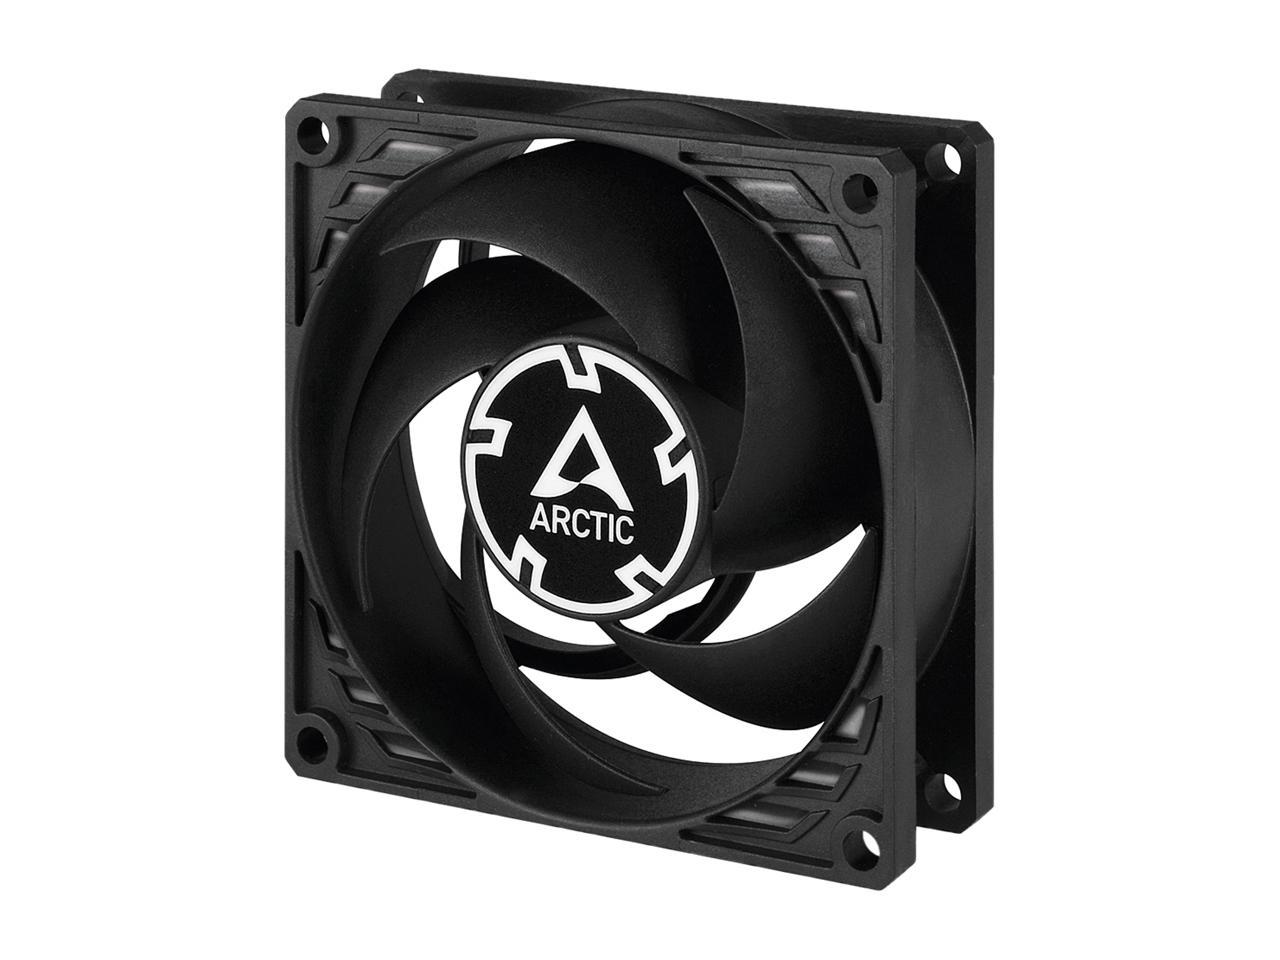 ARCTIC COOLING P8 PWM ACFAN00149A 80mm Pressure-optimised Case Fan with PWM